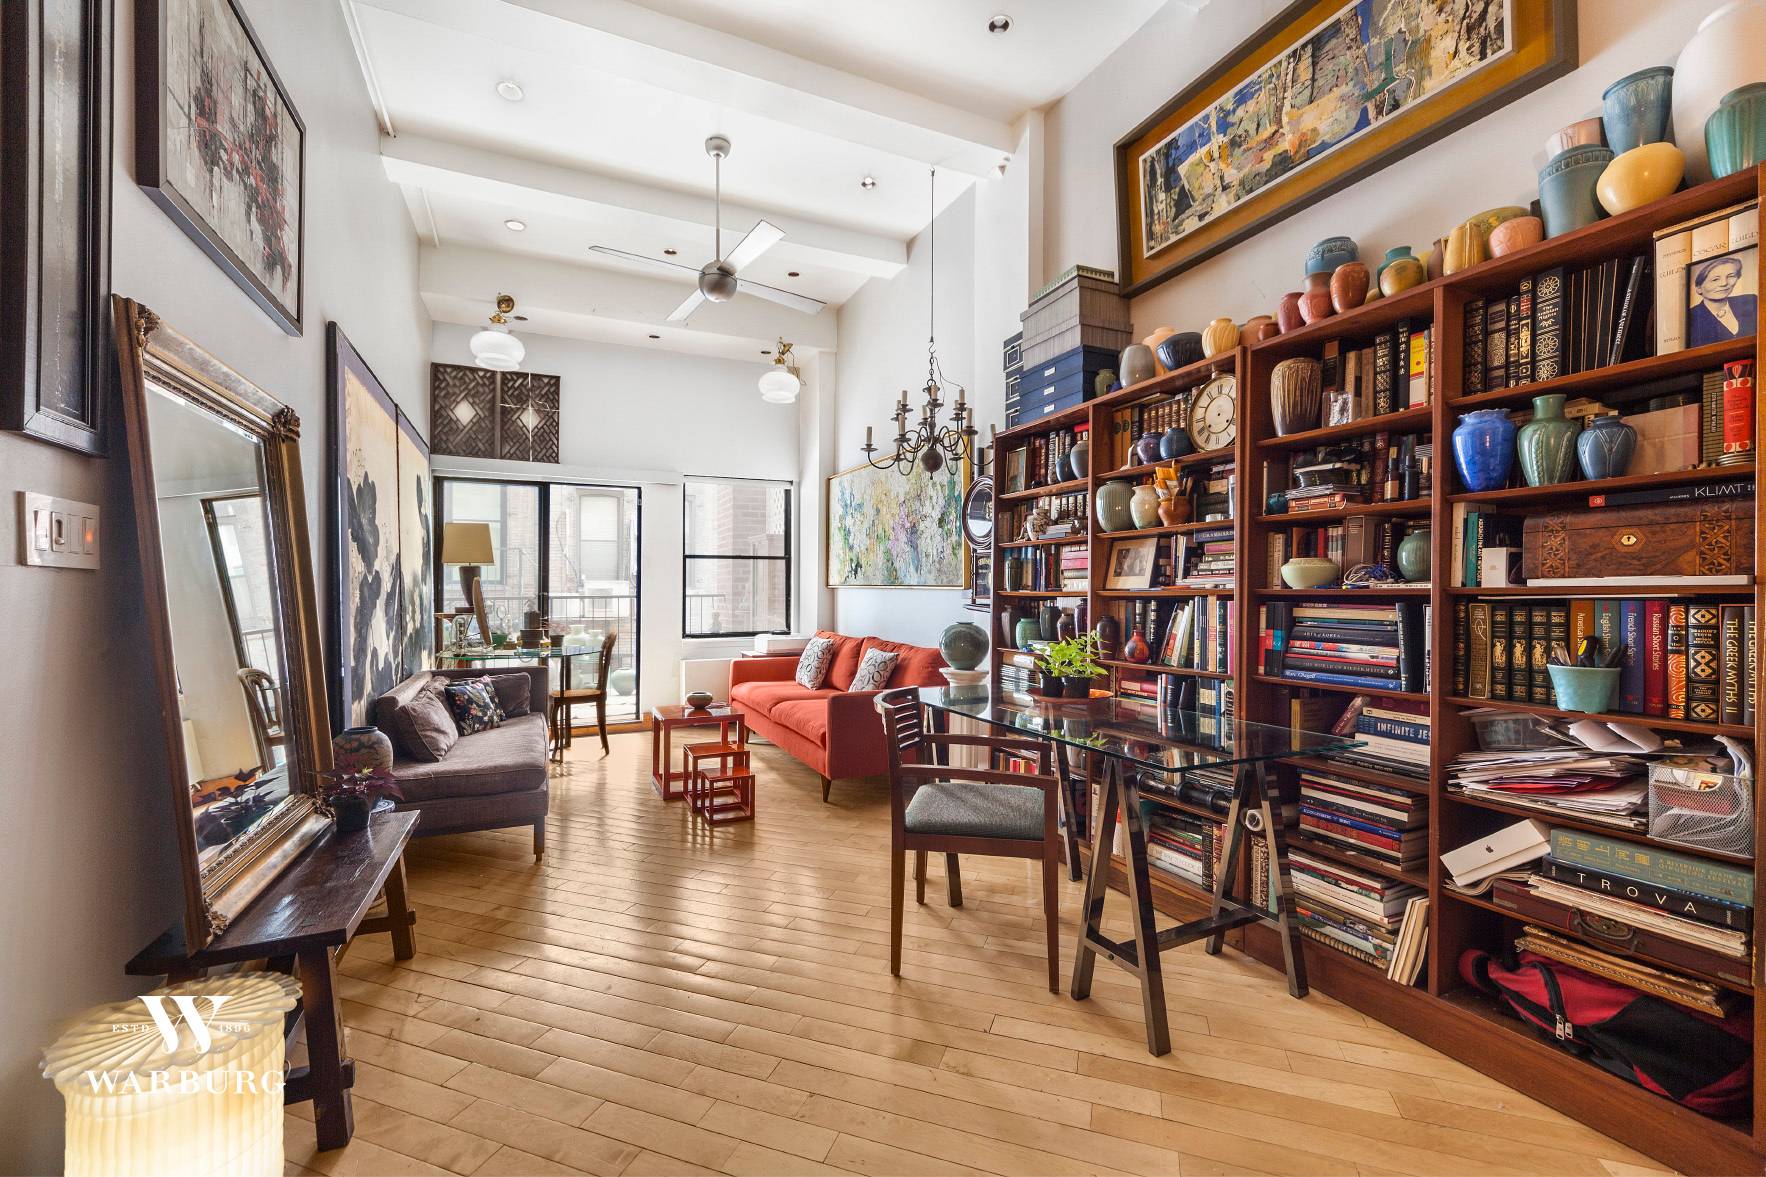 Gold Coast District of Central Greenwich Village A A A 35 East 10th StreetA A A fully renovated loft, one bedroom, one bath with 12 A A A ceilings, and ...